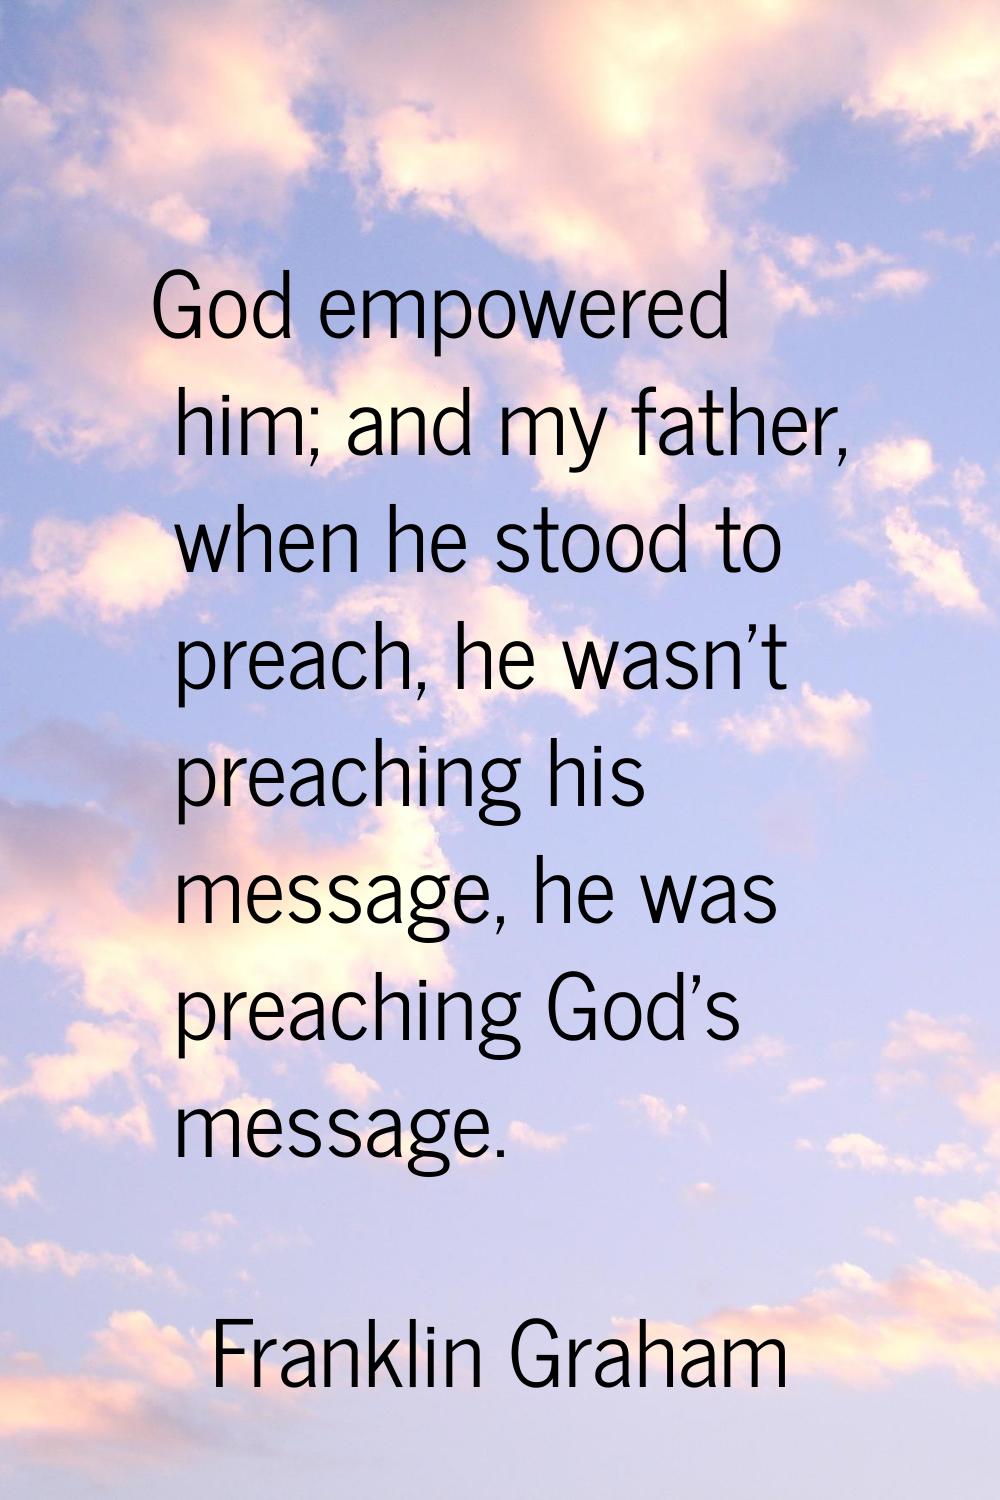 God empowered him; and my father, when he stood to preach, he wasn't preaching his message, he was 